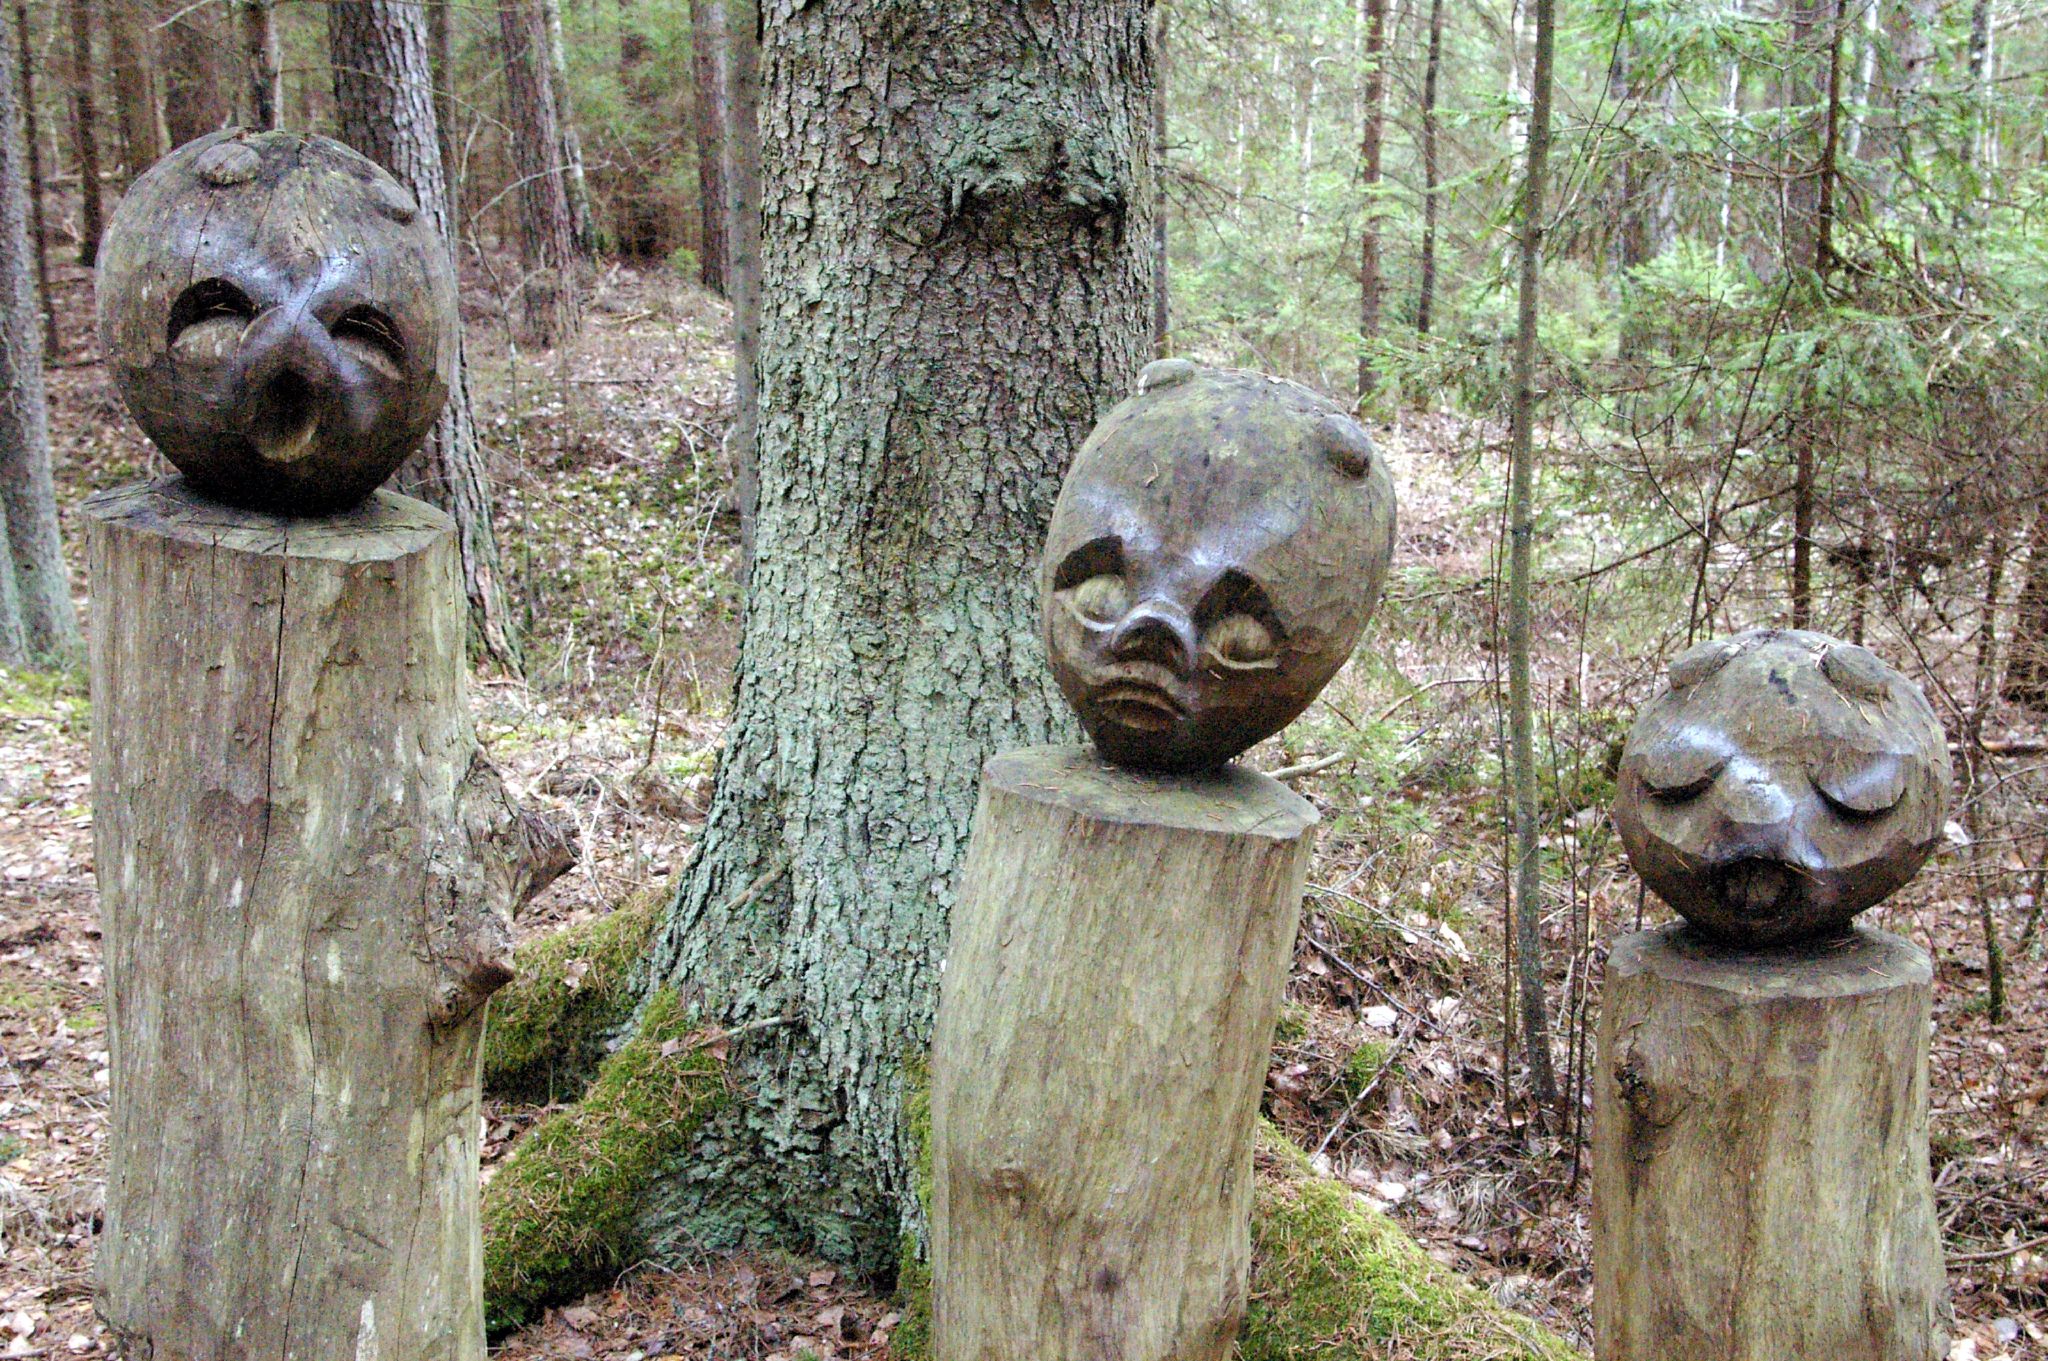 a group of wooden sculptures depicting faces of people in a forest